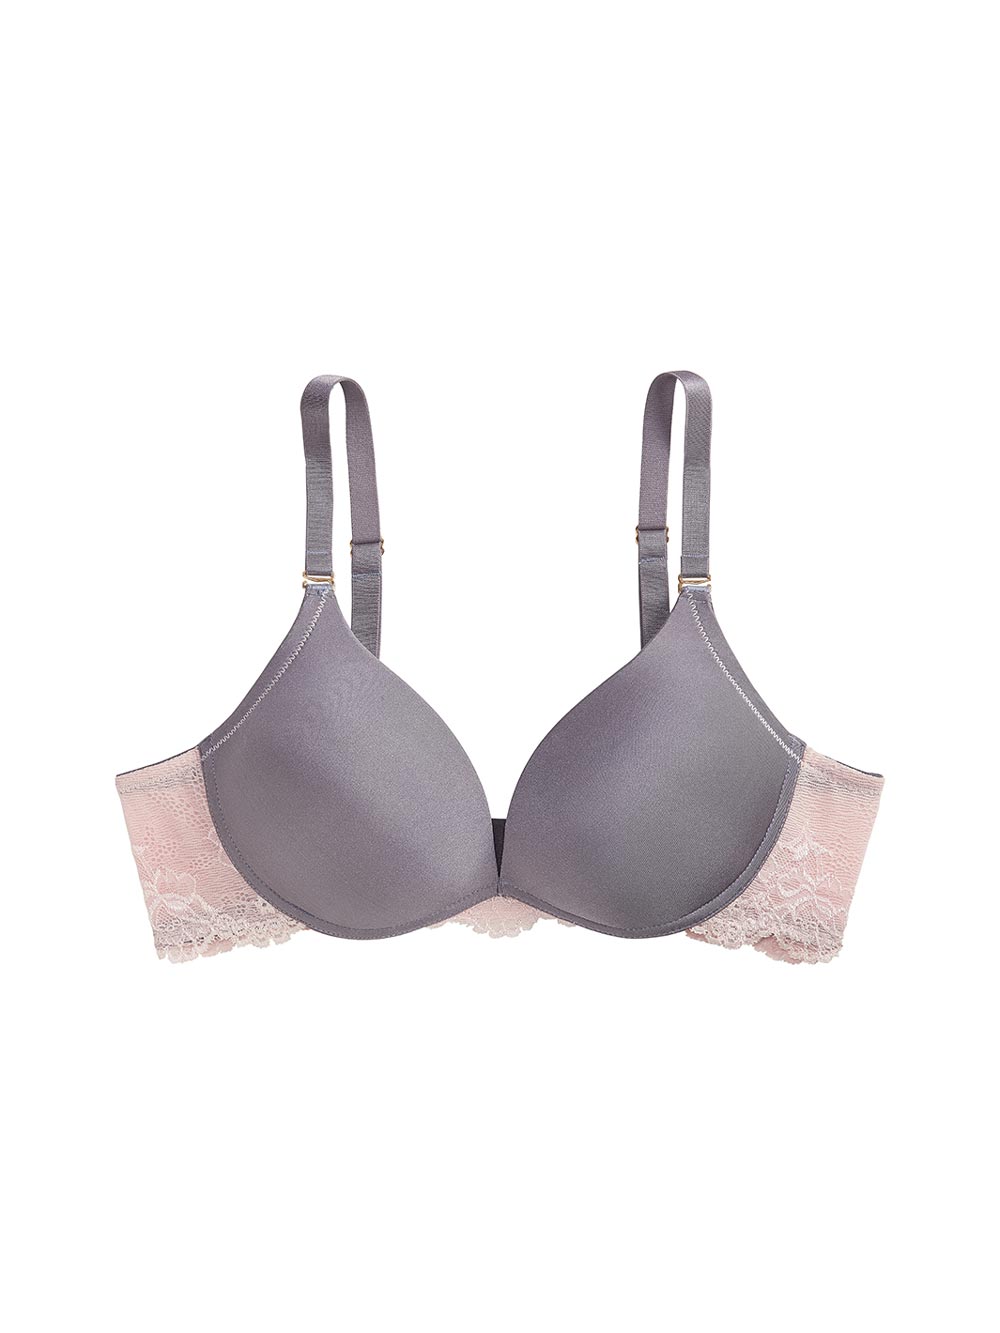 Review: Petite Friendly Bras - The Little Bra Company - Bra sizes 28C and  30C